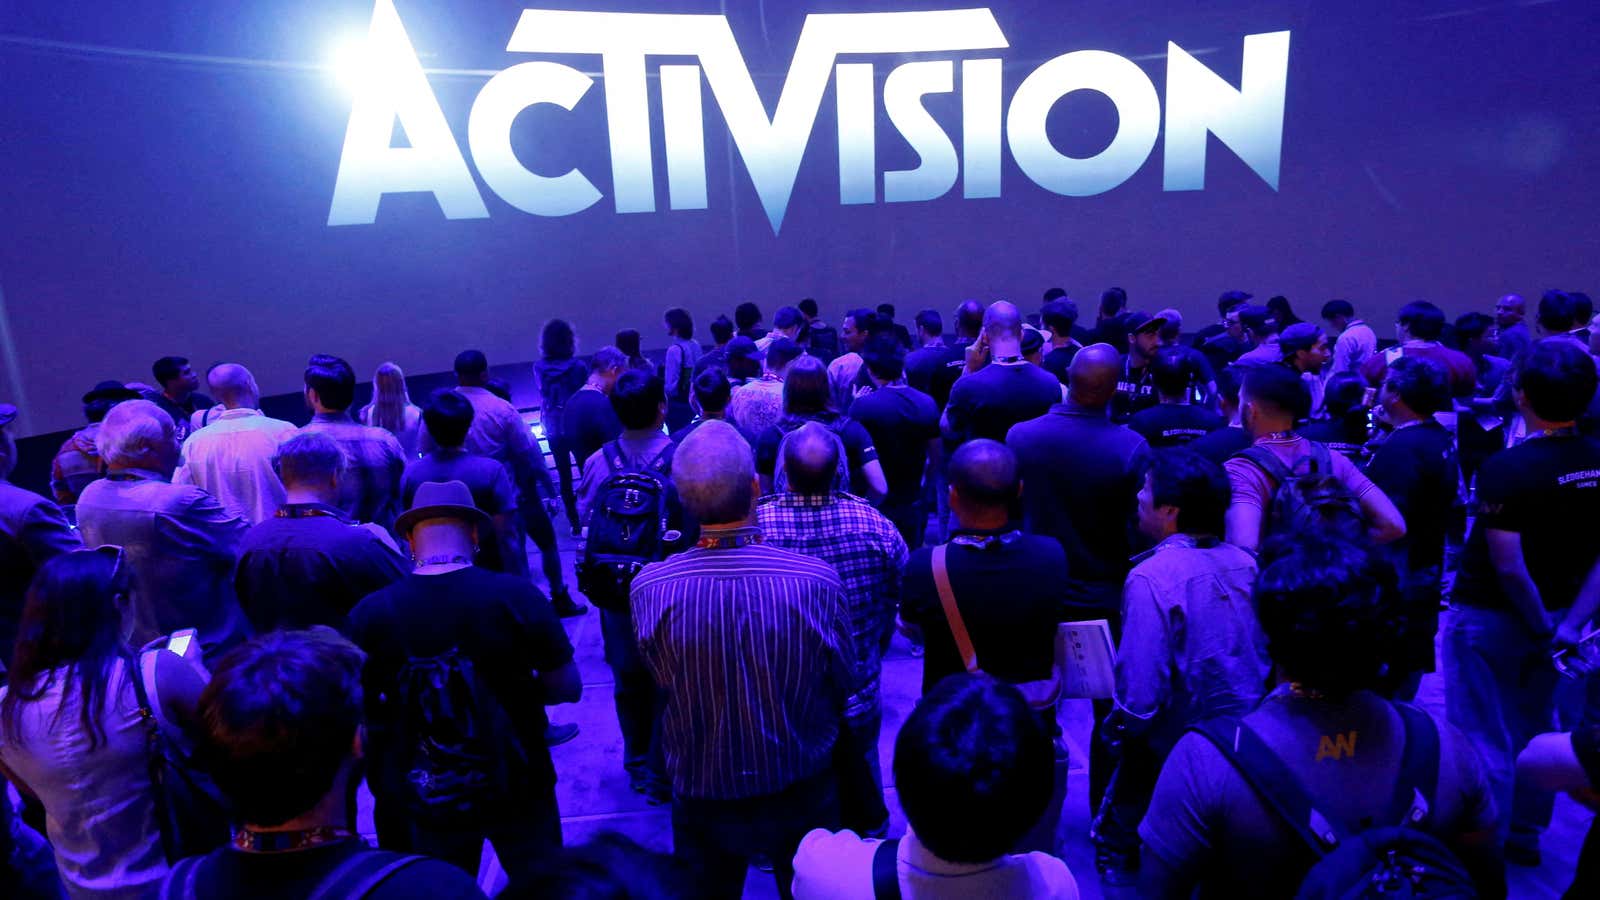 Employees at Activision Blizzard have voted to unionize.